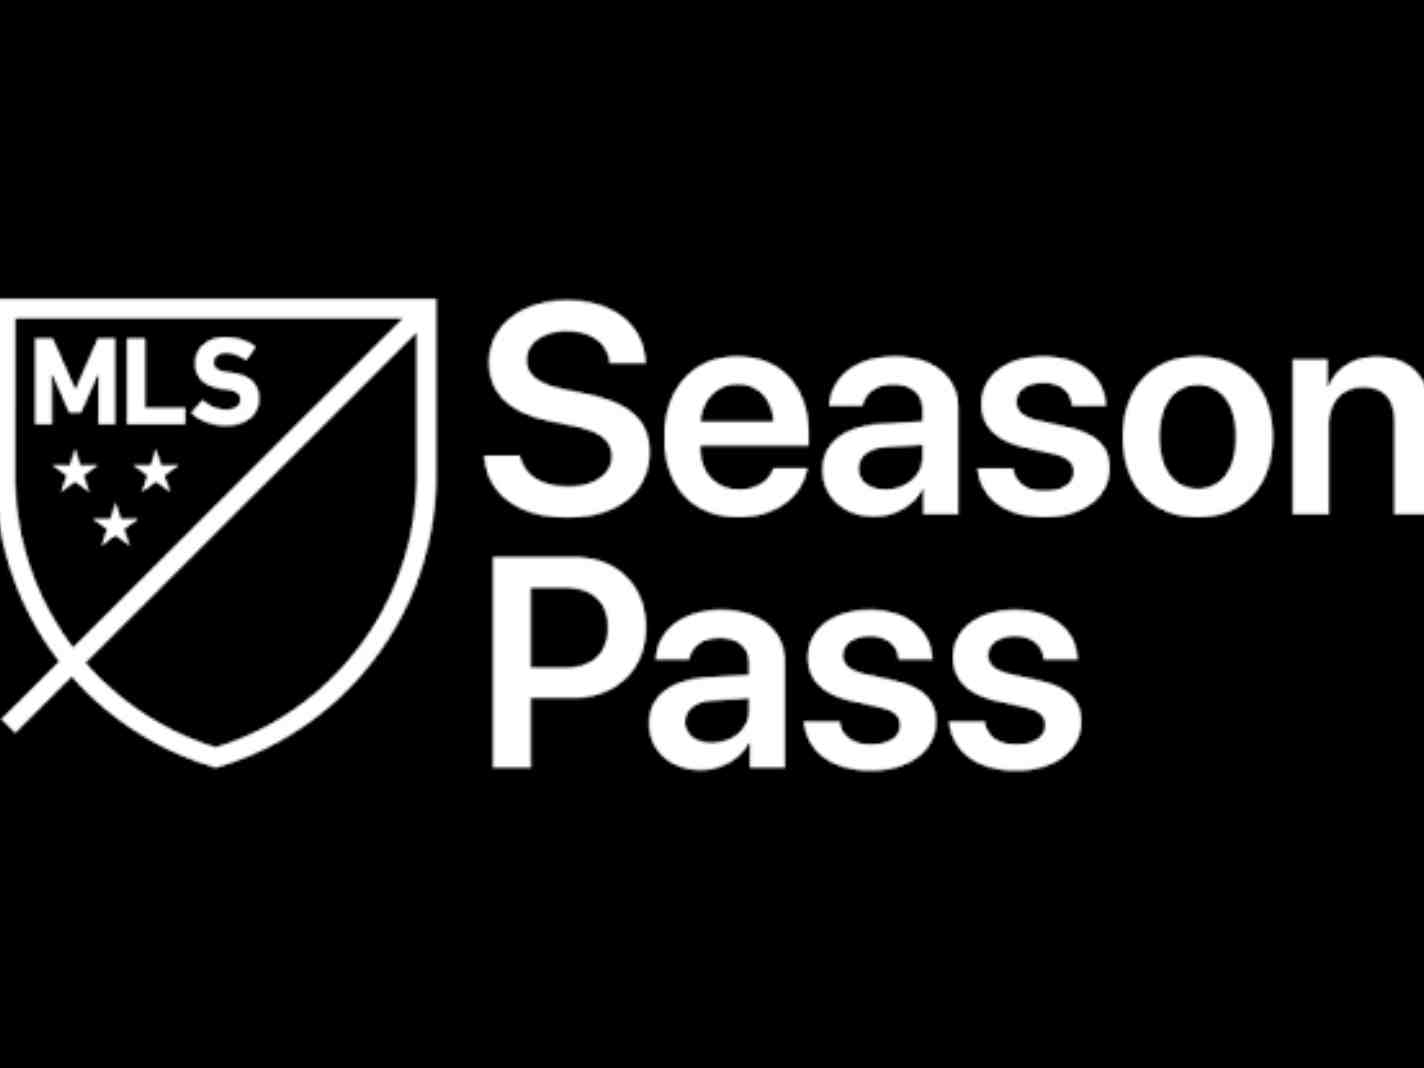 The Public Outrage Over MLS Season Pass: What Went Wrong?